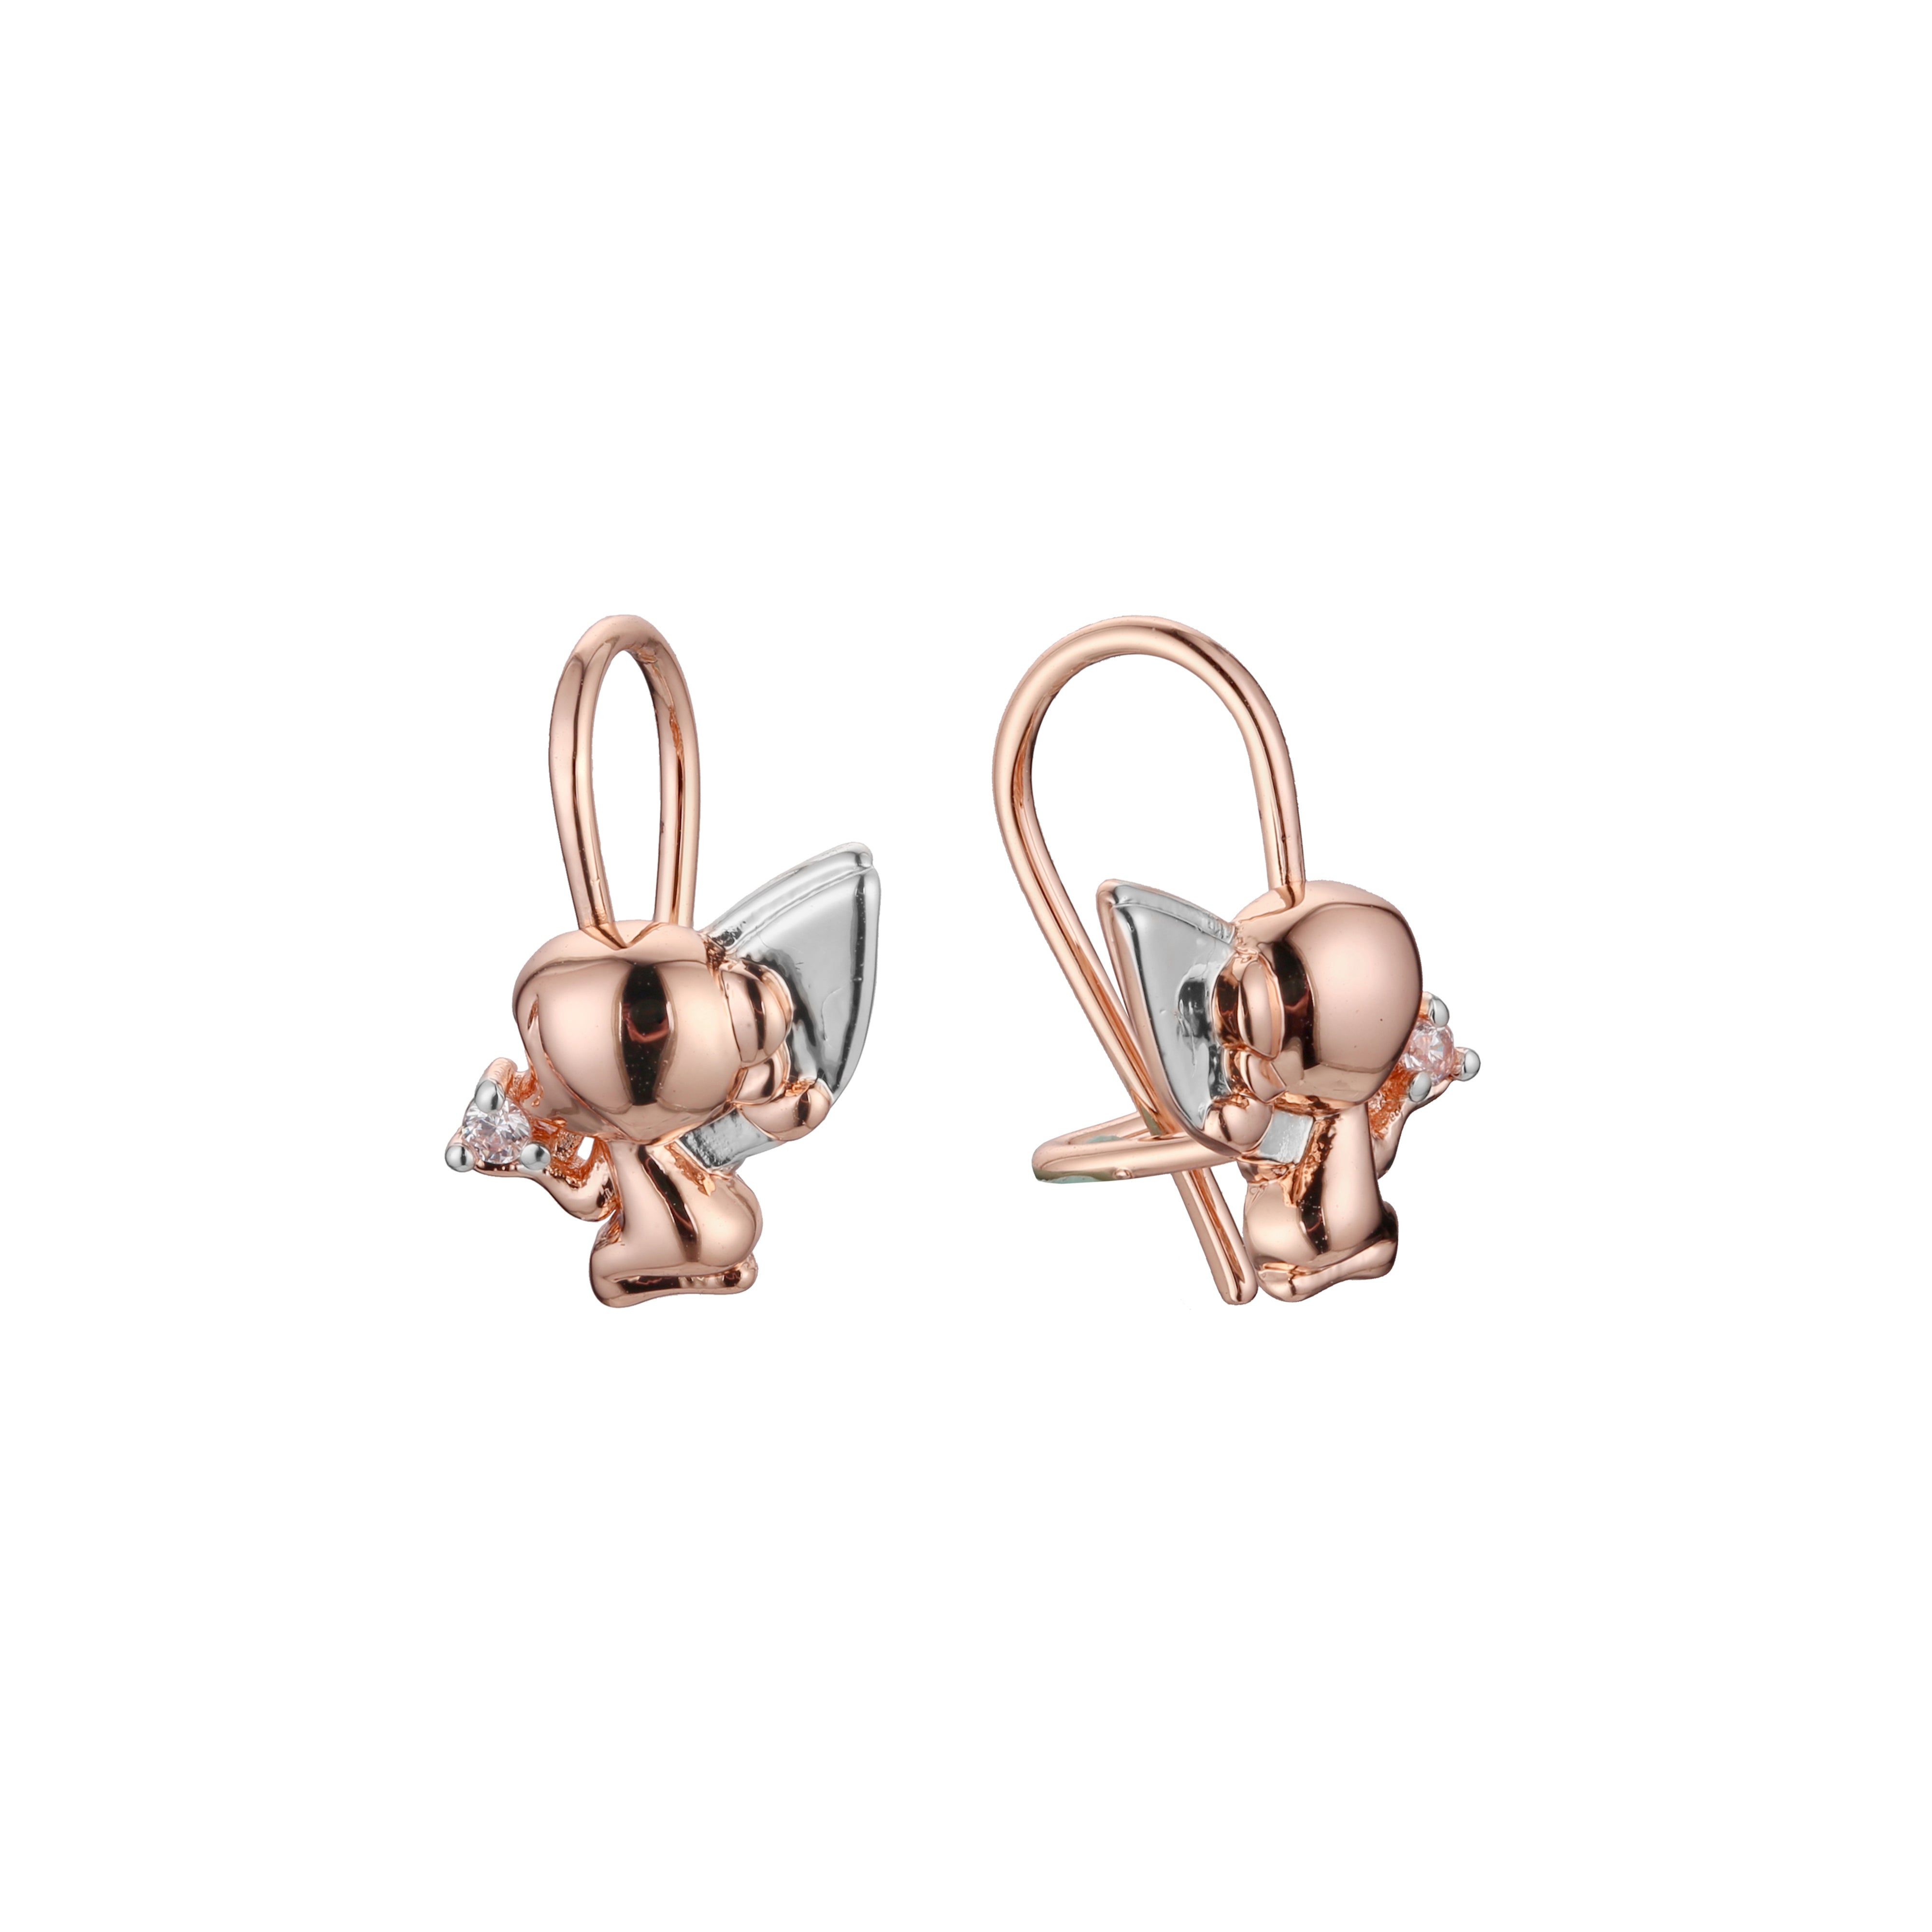 Baby wire hook child earrings in 14K Gold, Rose Gold, two tone plating colors